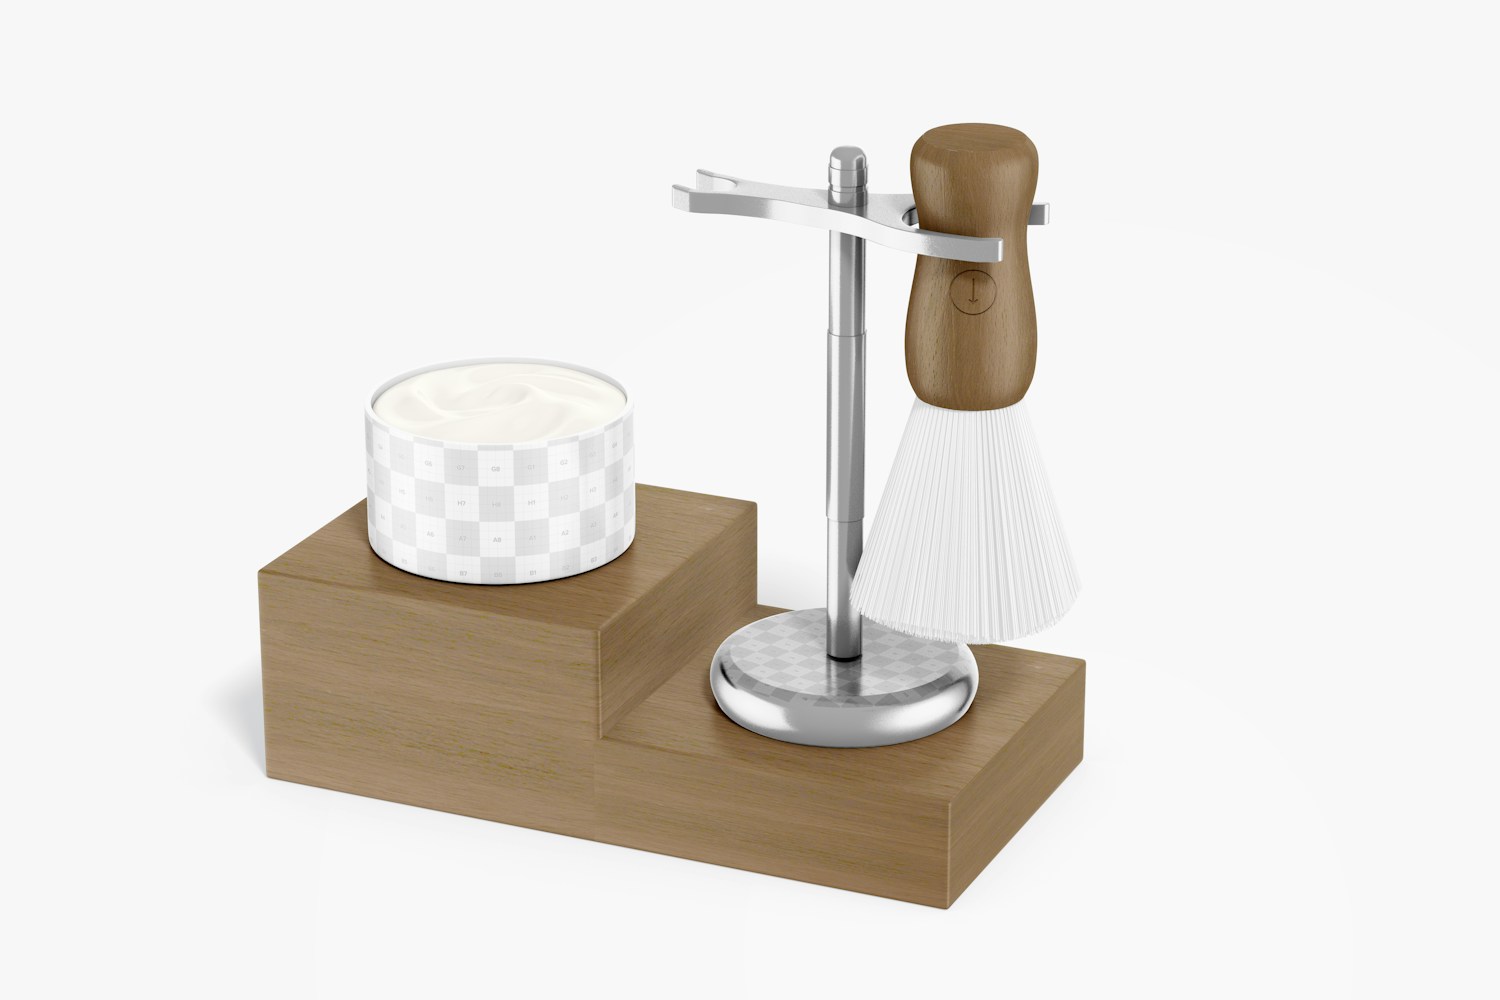 Shaving Stand with Cream Mockup